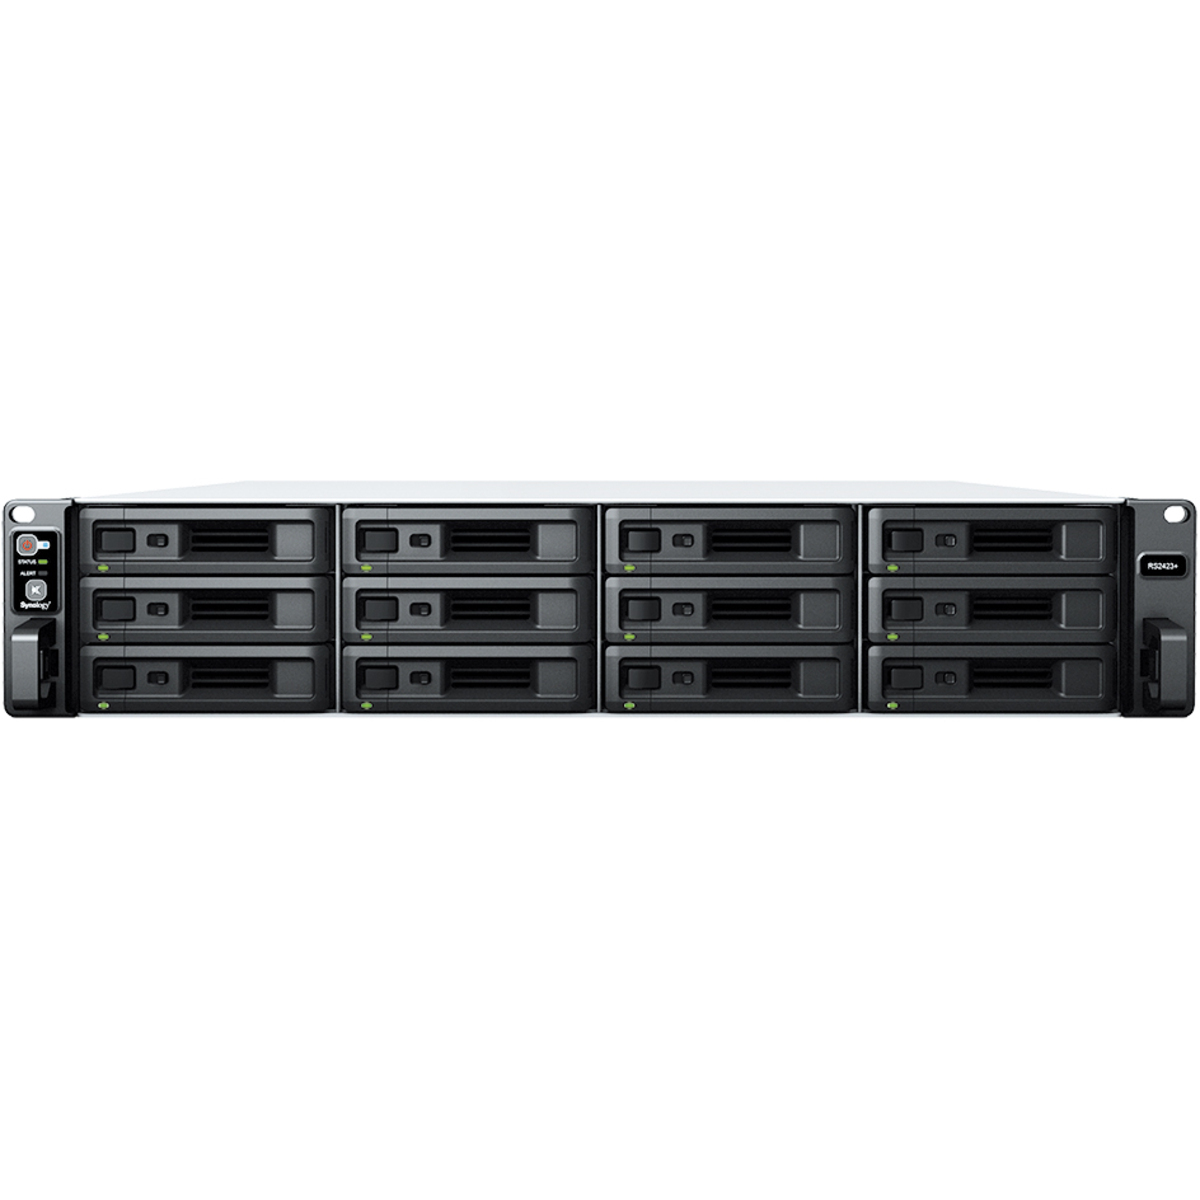 Synology RackStation RS2423RP+ 64tb 12-Bay RackMount Multimedia / Power User / Business NAS - Network Attached Storage Device 8x8tb Seagate BarraCuda ST8000DM004 3.5 5400rpm SATA 6Gb/s HDD CONSUMER Class Drives Installed - Burn-In Tested - FREE RAM UPGRADE RackStation RS2423RP+